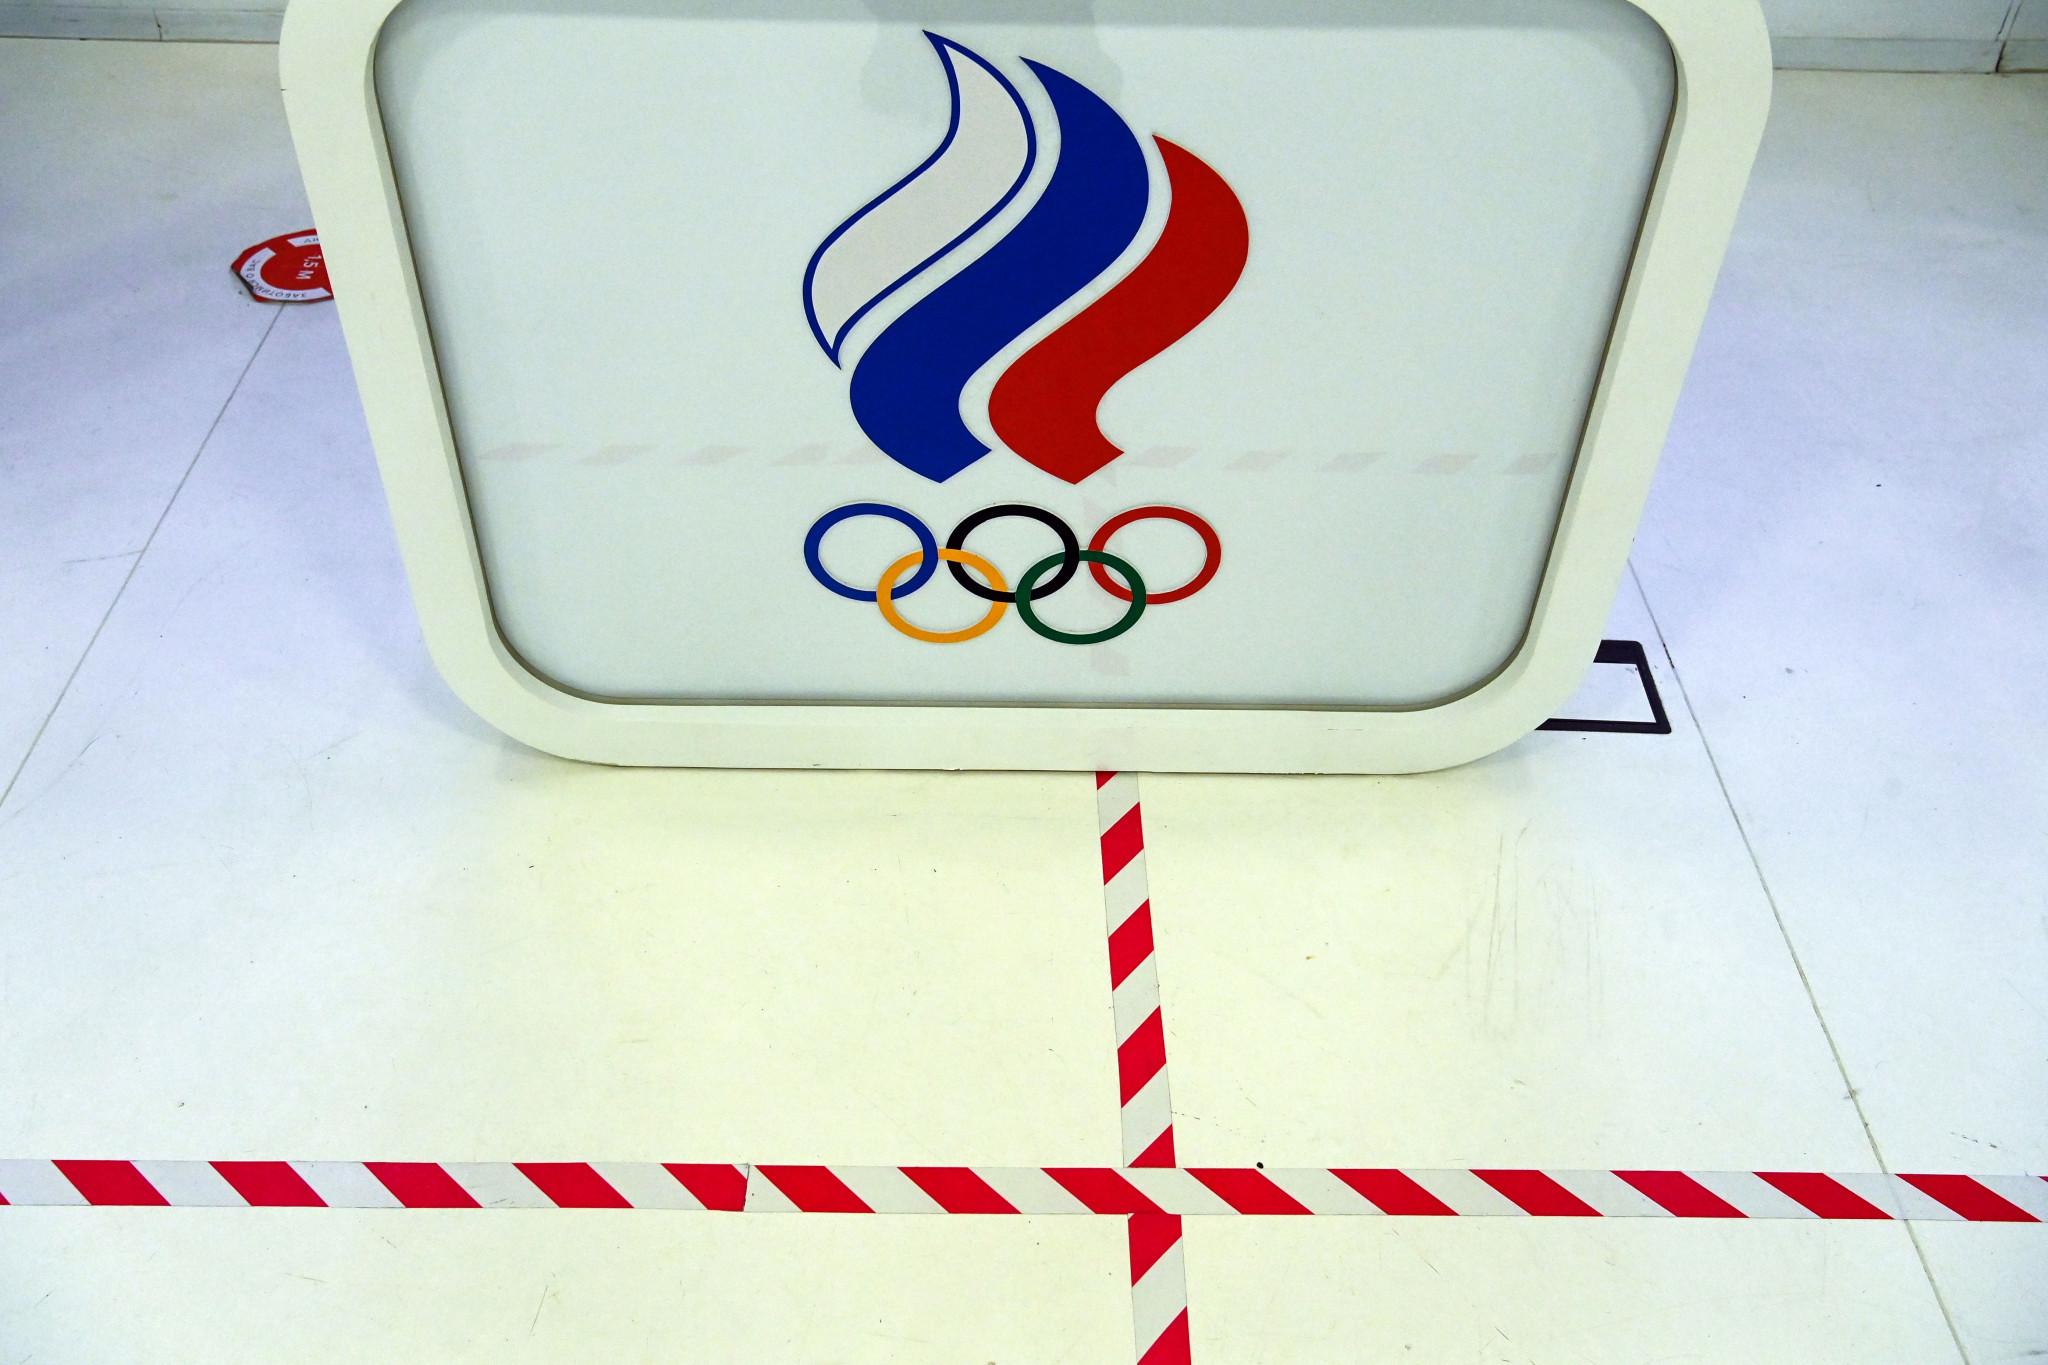 International Federations implement bans on athletes and teams from Russia and Belarus